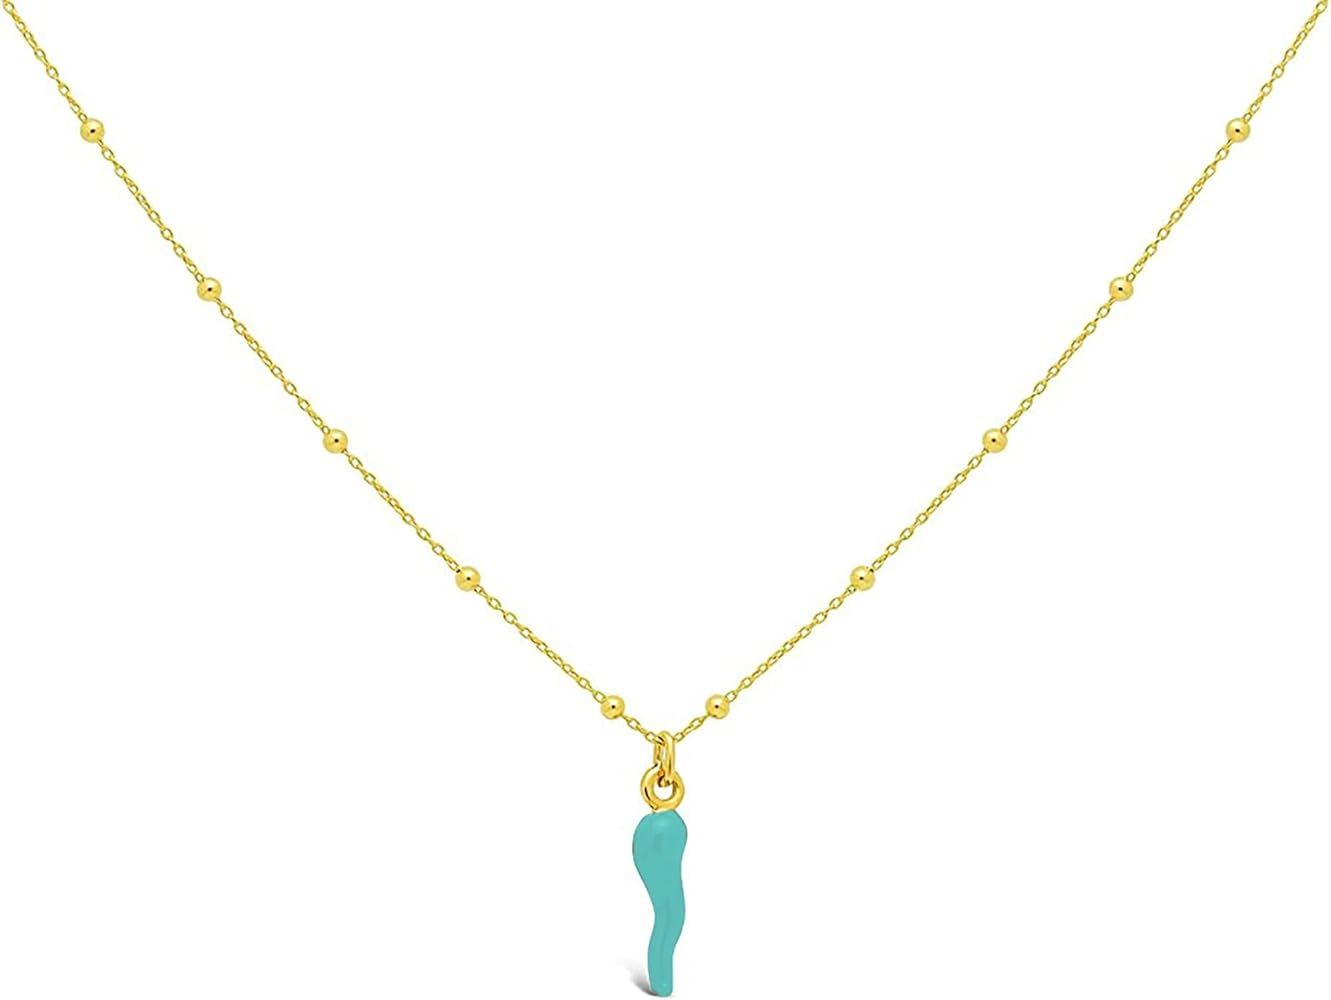 FRONAY Italian Red Horn Necklace - 14k Gold Plated Silver Cornicello Good Luck Pendant | Amazon (US)